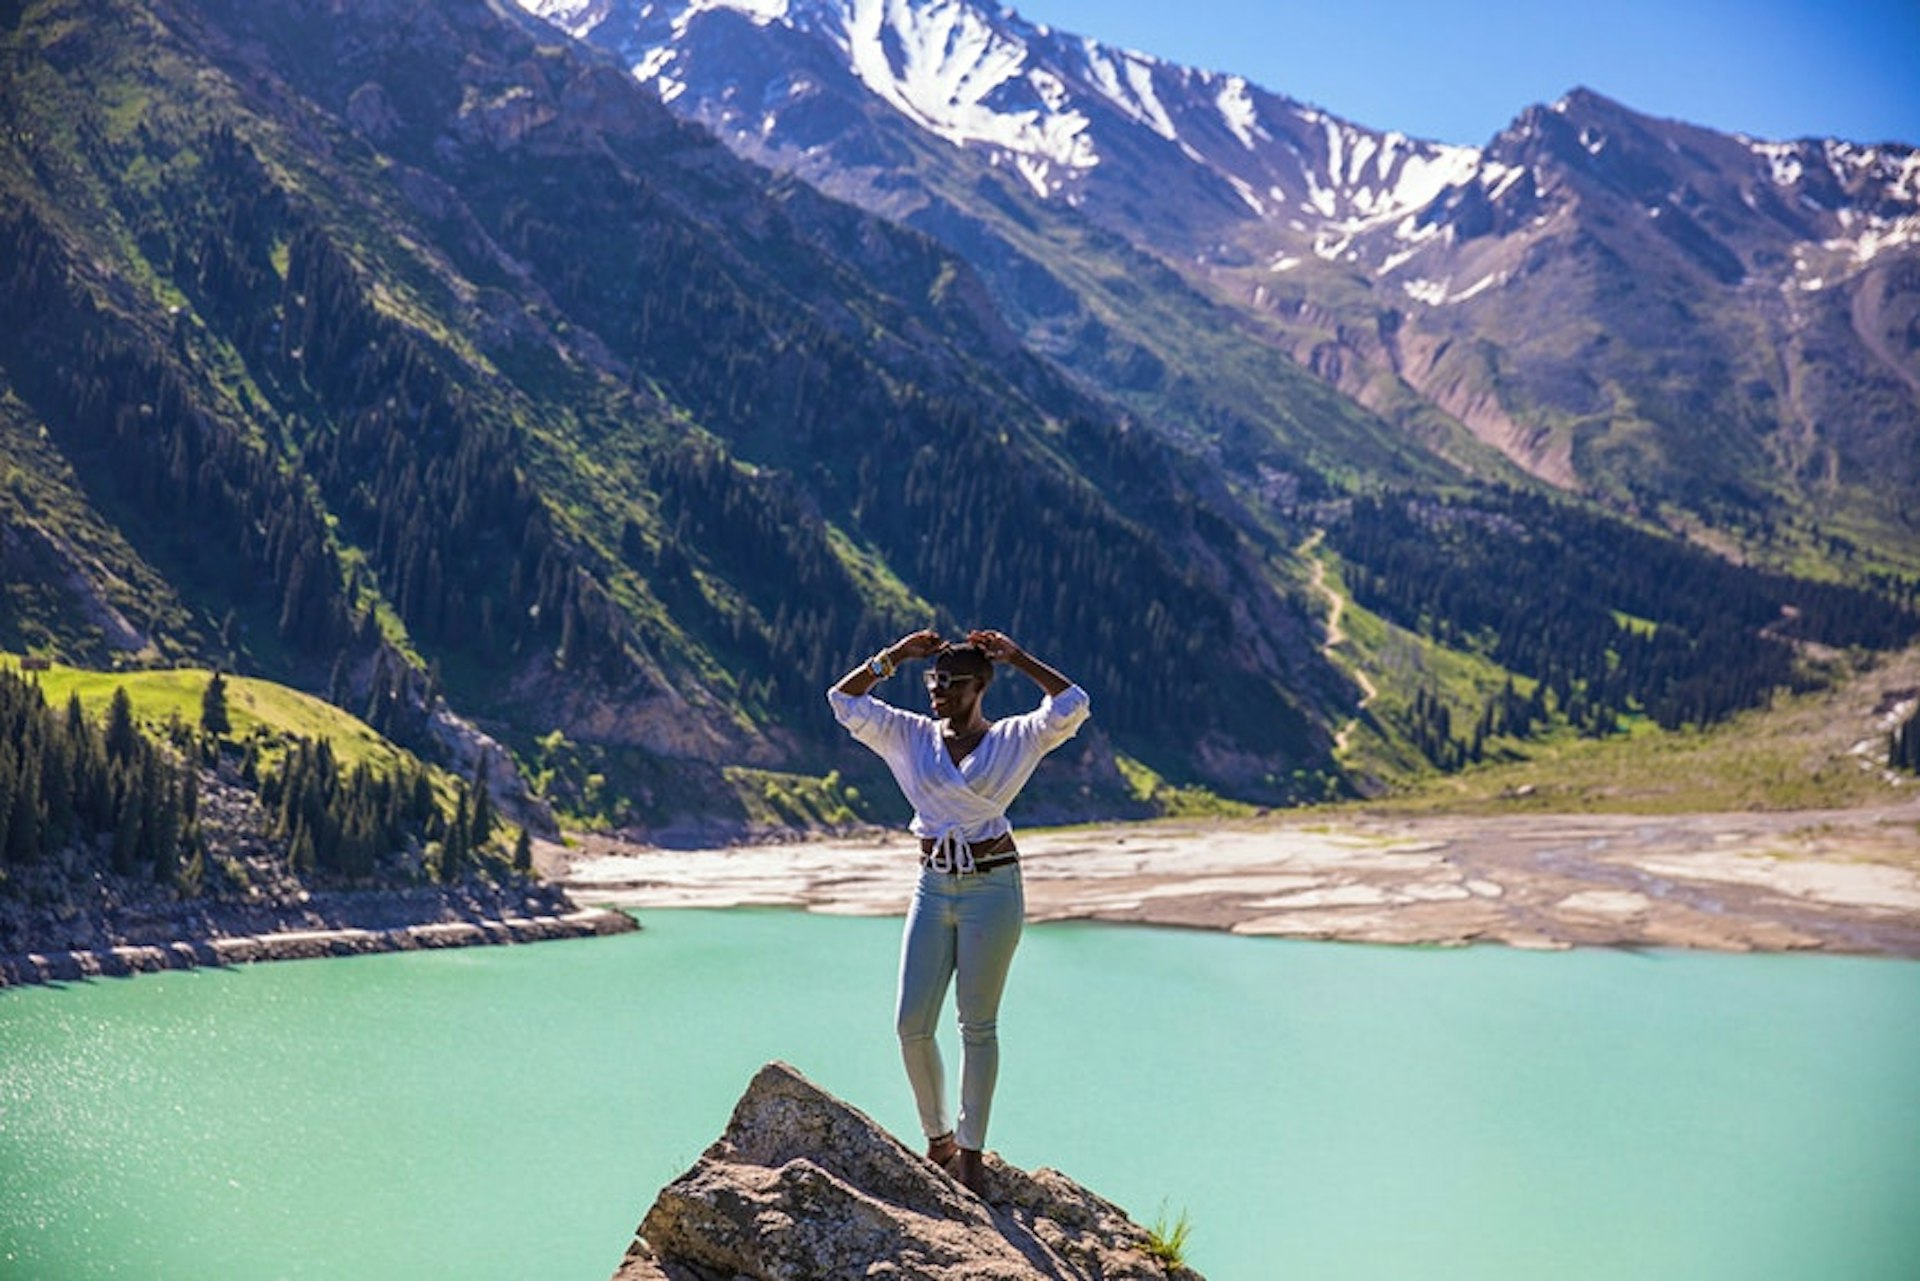 A black woman stands on a large rock above a stunning clear blue lake in a mountain landscape